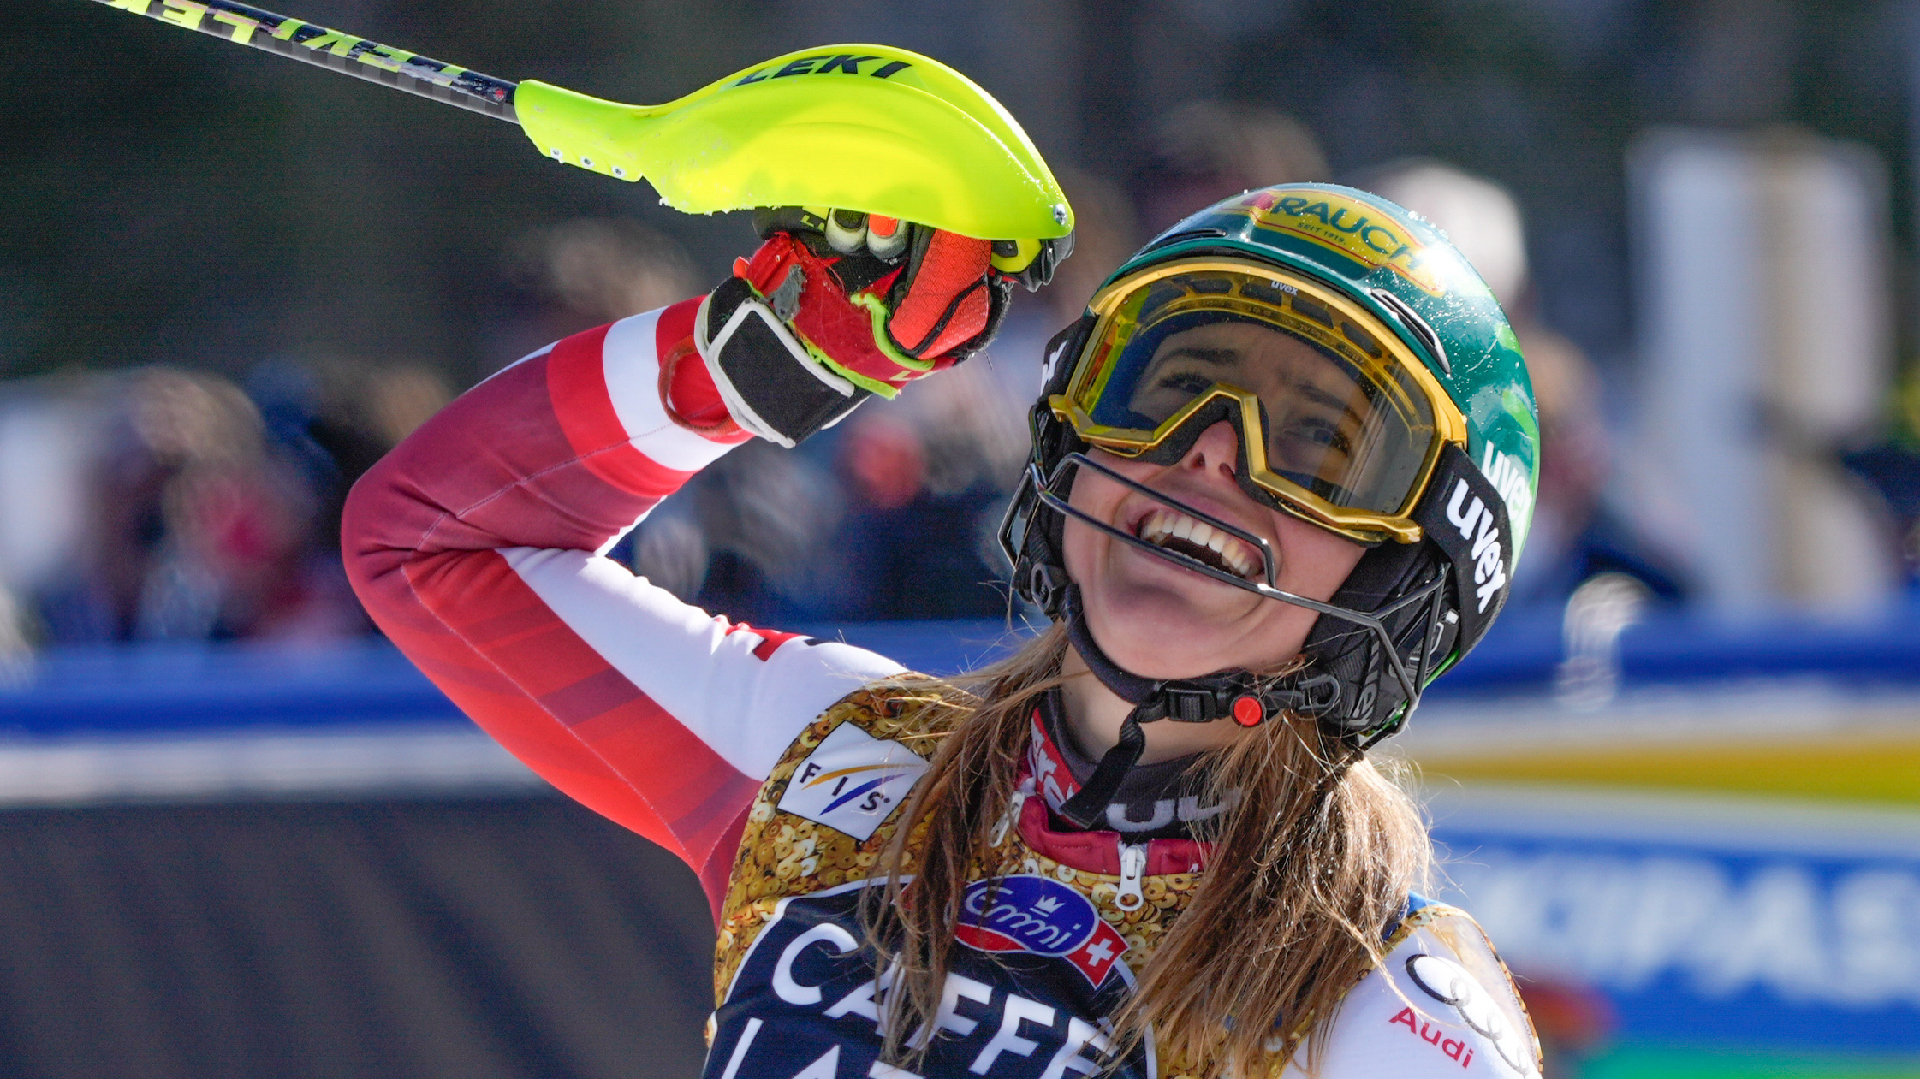 alpine-skiing-liensberger-ends-shiffrins-reign-with-slalom-gold